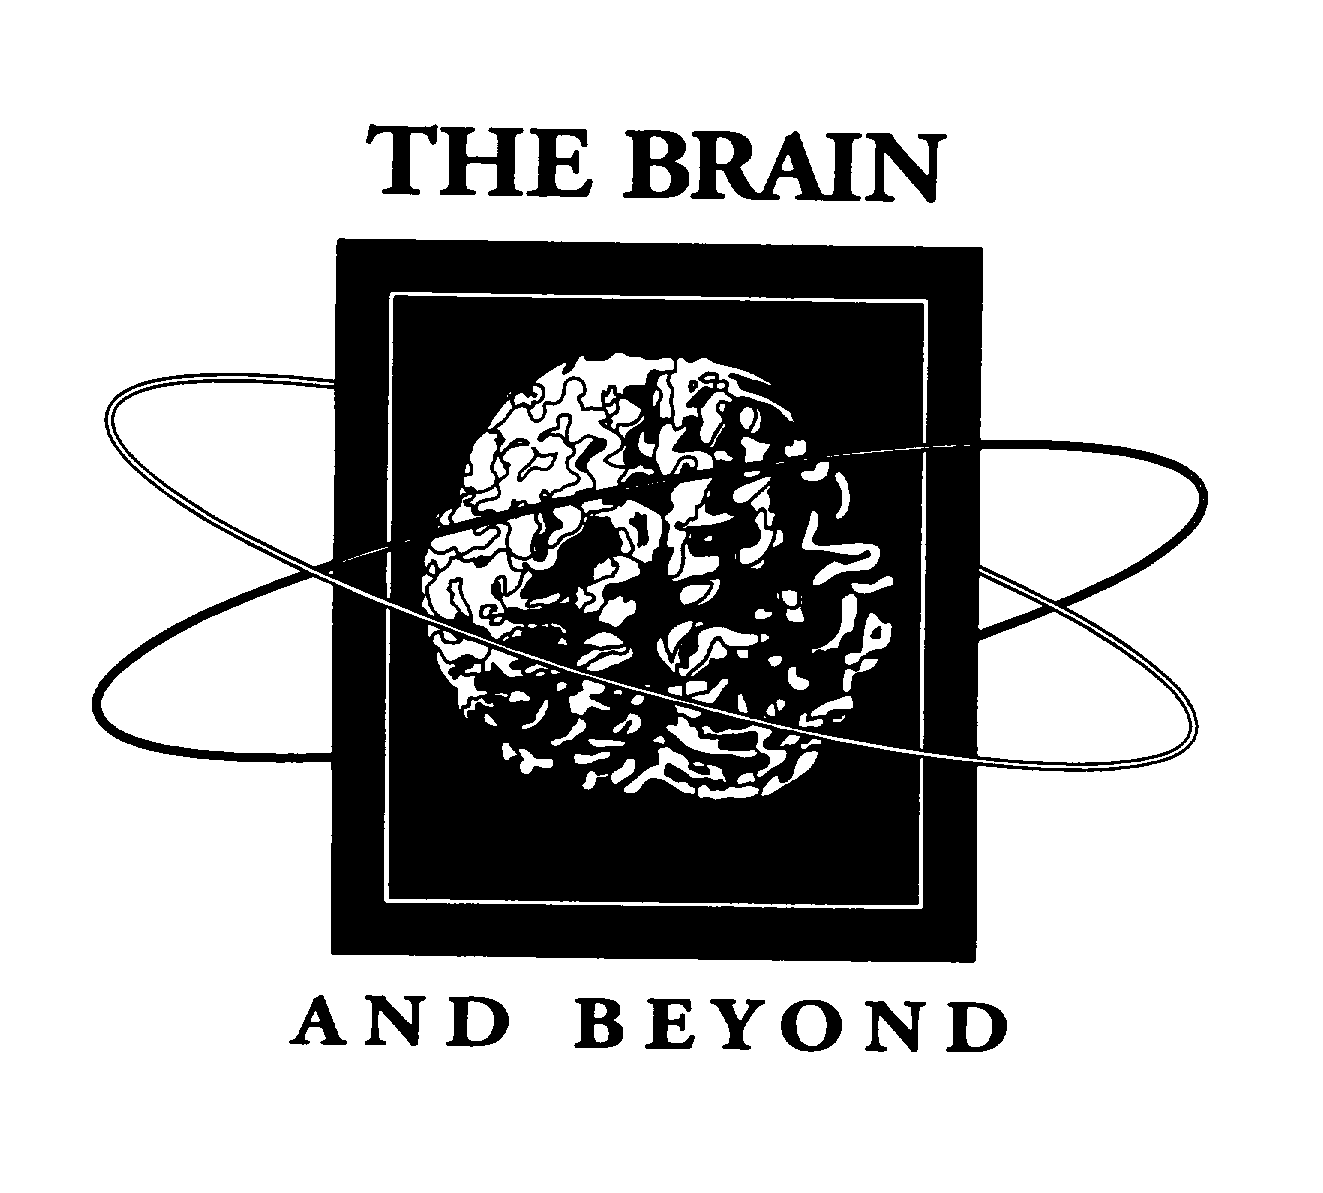 THE BRAIN AND BEYOND